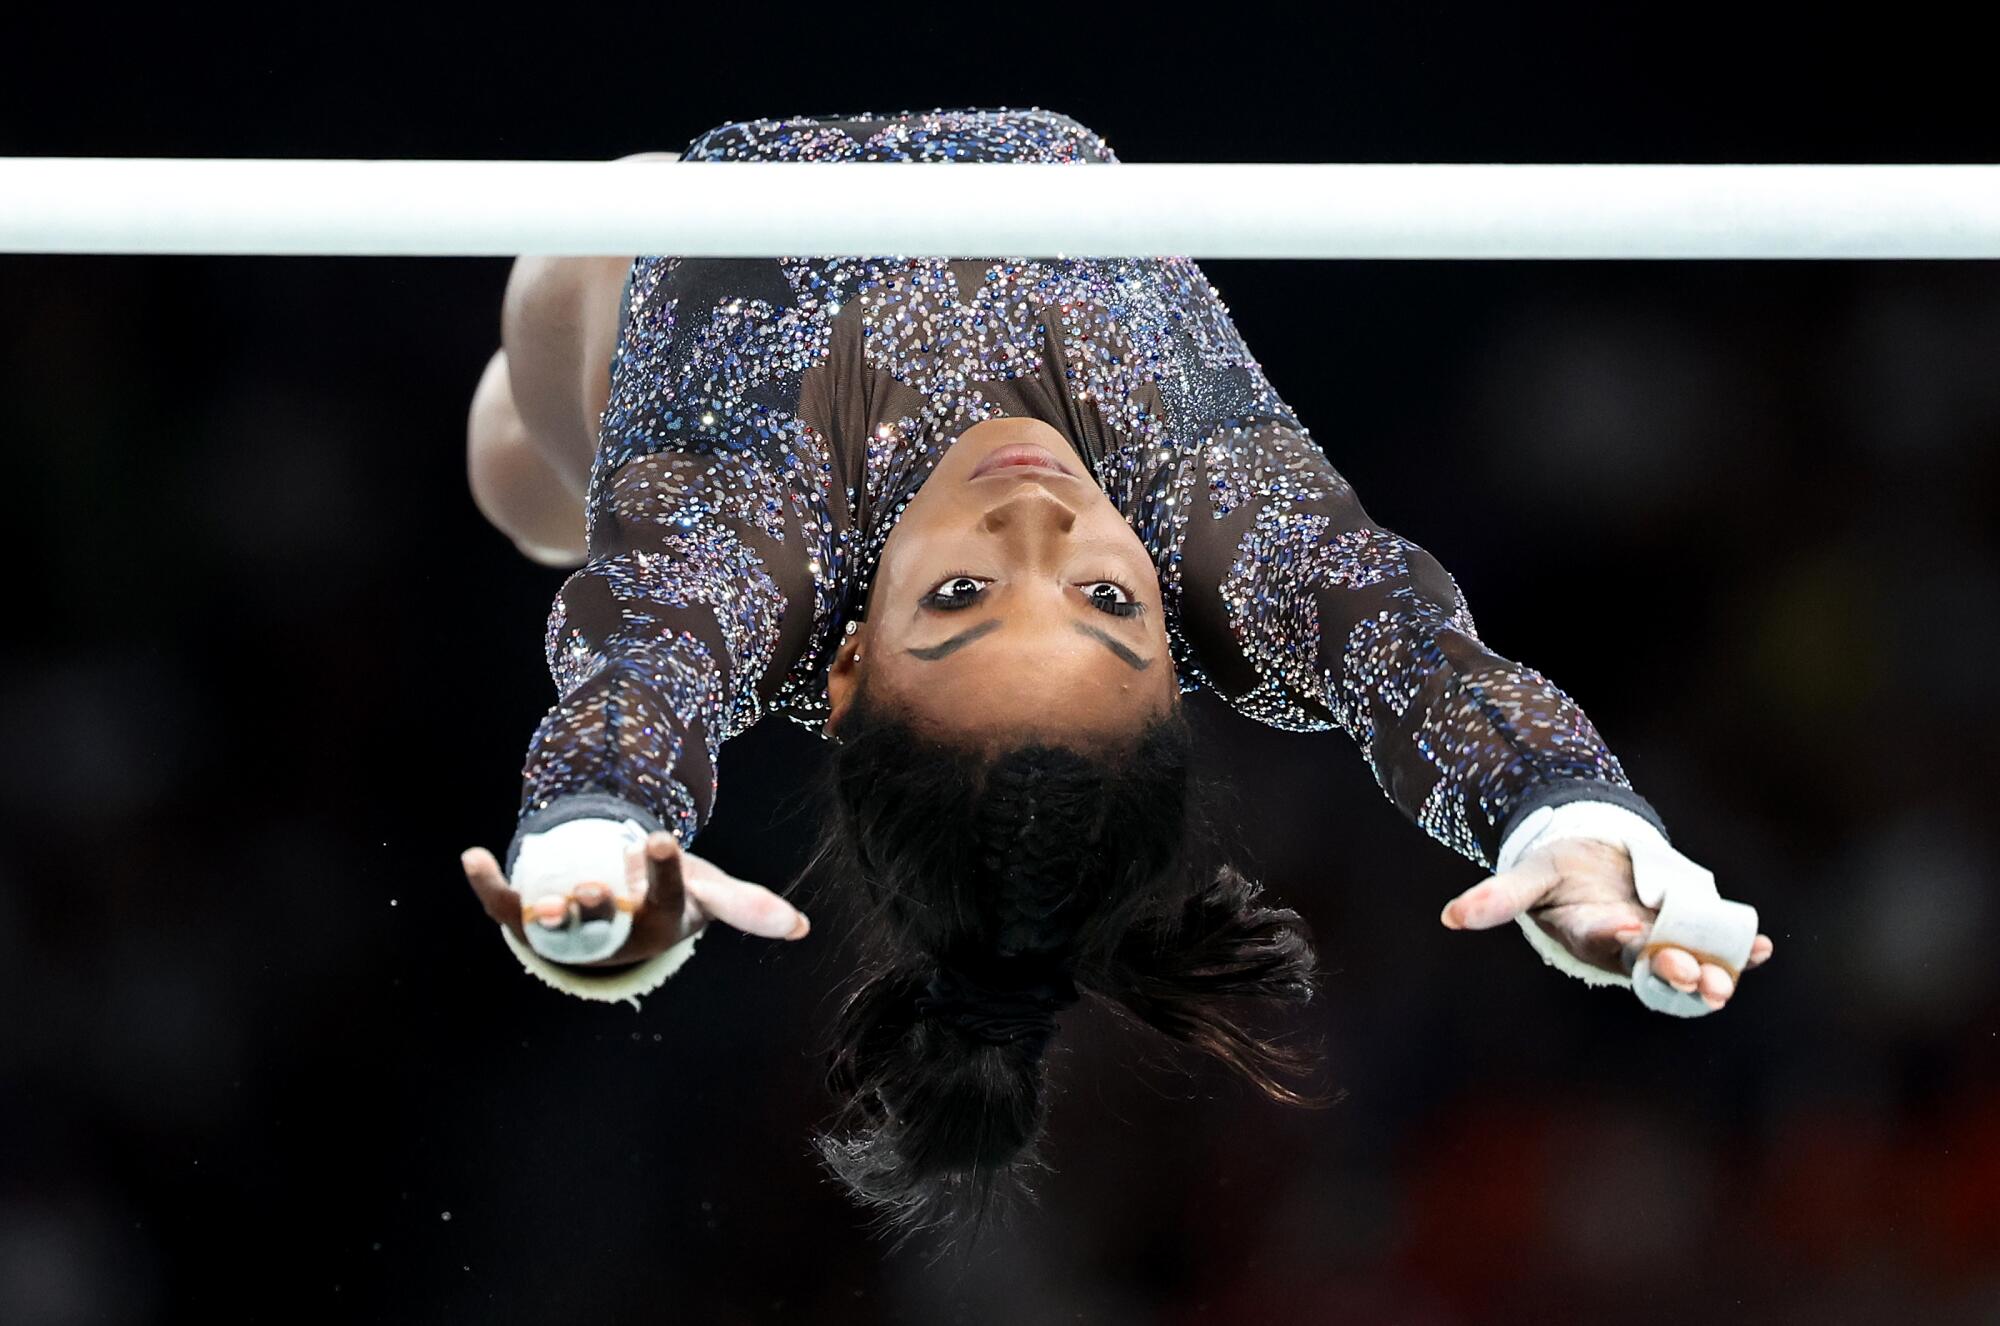 USA's Simone Biles competes on the uneven bars during qualifying for women's team gymnastics at the 2024 Olympics in Paris.